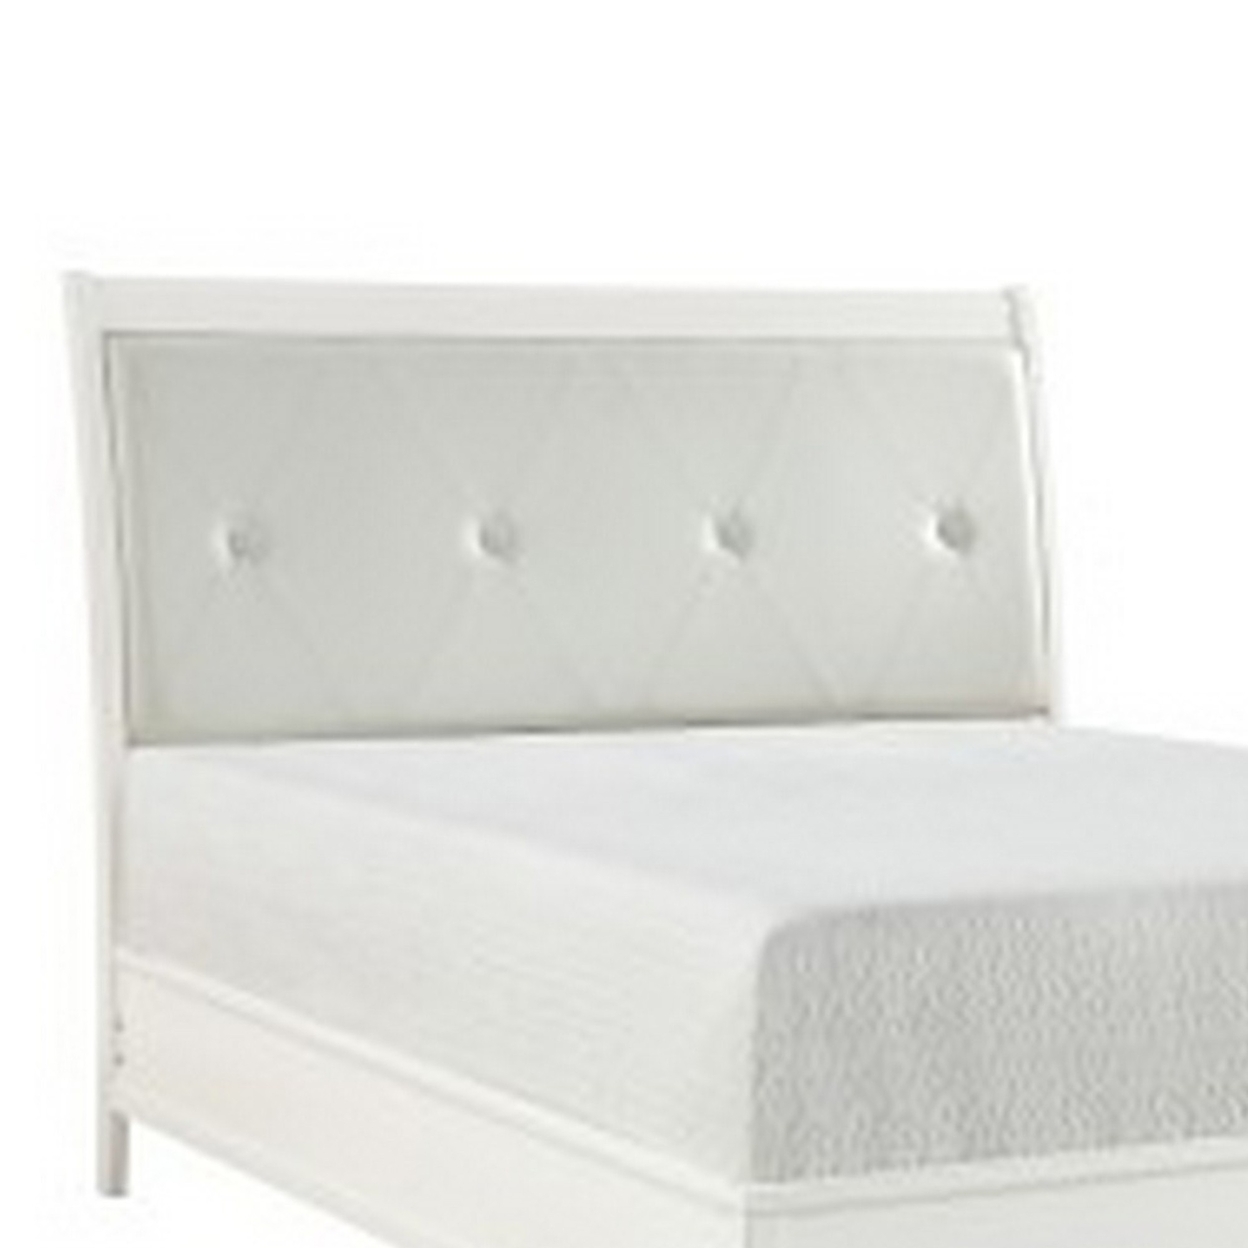 Hadly Classic Queen Sleigh Bed, Button Tufted Headboard, White Faux Leather- Saltoro Sherpi